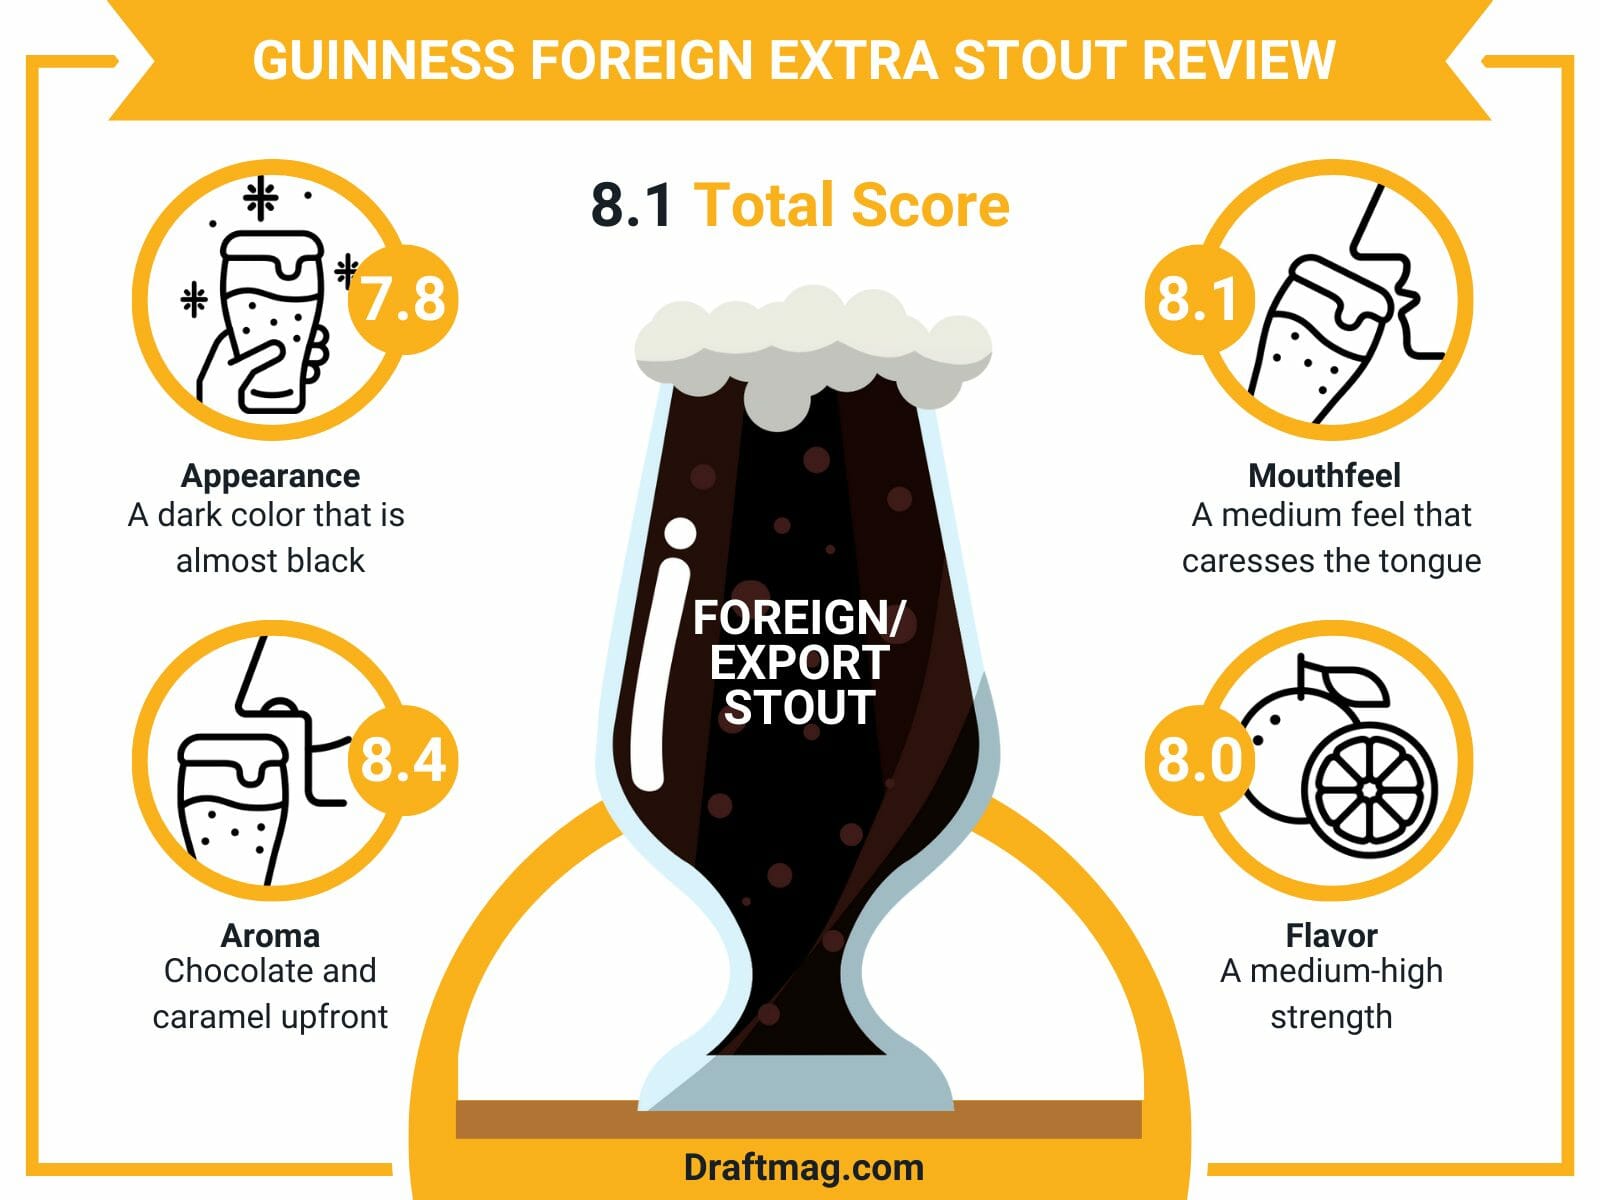 Guinness foreign extra stout review infographic